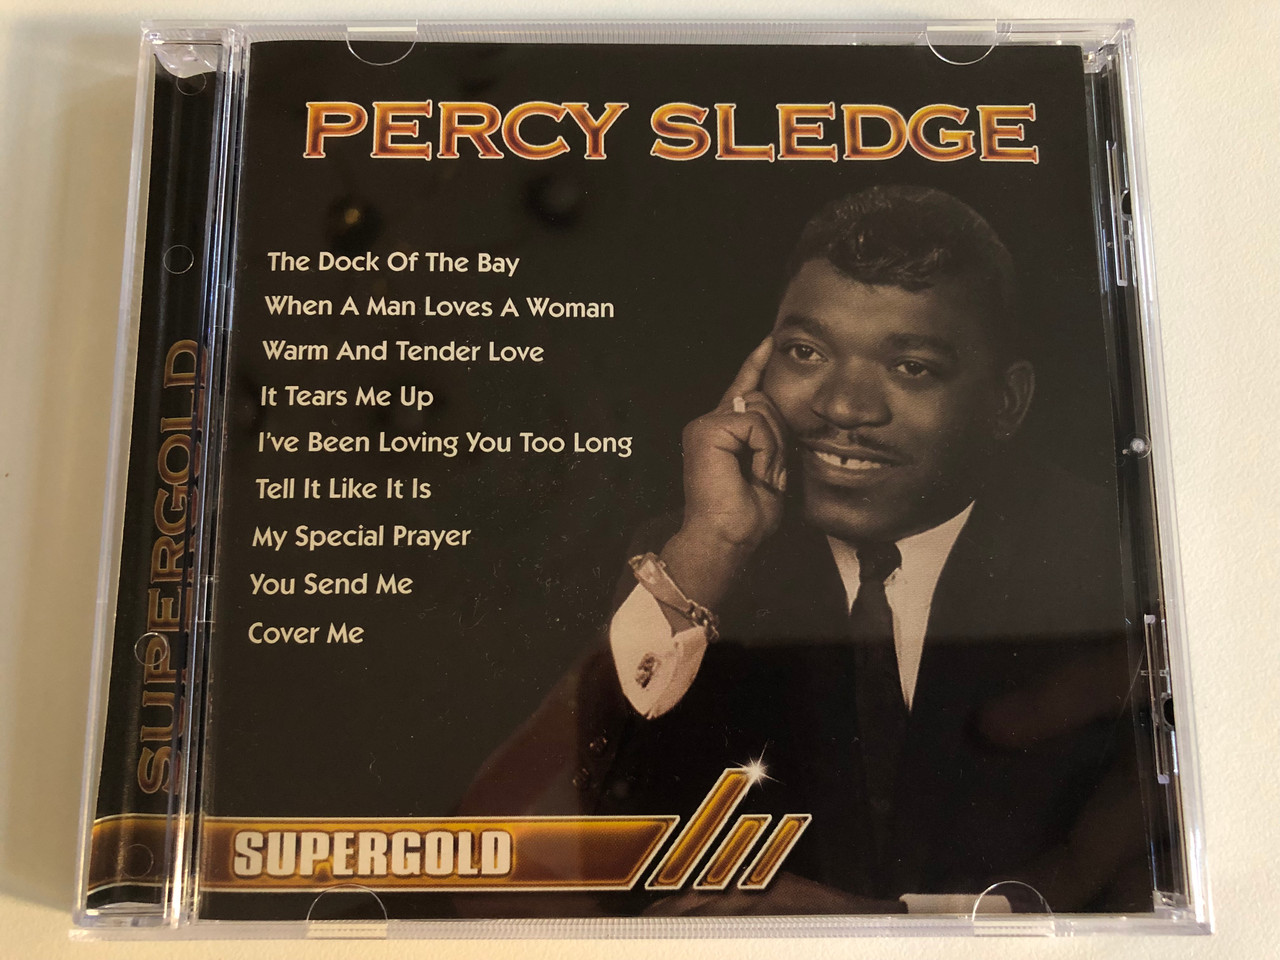 https://cdn10.bigcommerce.com/s-62bdpkt7pb/products/0/images/188010/Percy_Sledge_-_The_Dock_Of_The_Bay_When_A_Man_Loves_a_Woman_Warm_And_Tender_Love_It_Tears_Me_Up_Ive_Been_Loving_You_Too_Long_Tell_It_Like_It_Is_My_Special_Prayer_You_Send_Me_Cover_Me_1__10975.1629215419.1280.1280.JPG?c=2&_gl=1*1dt40yq*_ga*MjA2NTIxMjE2MC4xNTkwNTEyNTMy*_ga_WS2VZYPC6G*MTYyOTIwODAwMC4zNS4xLjE2MjkyMTUyMTQuNTk.